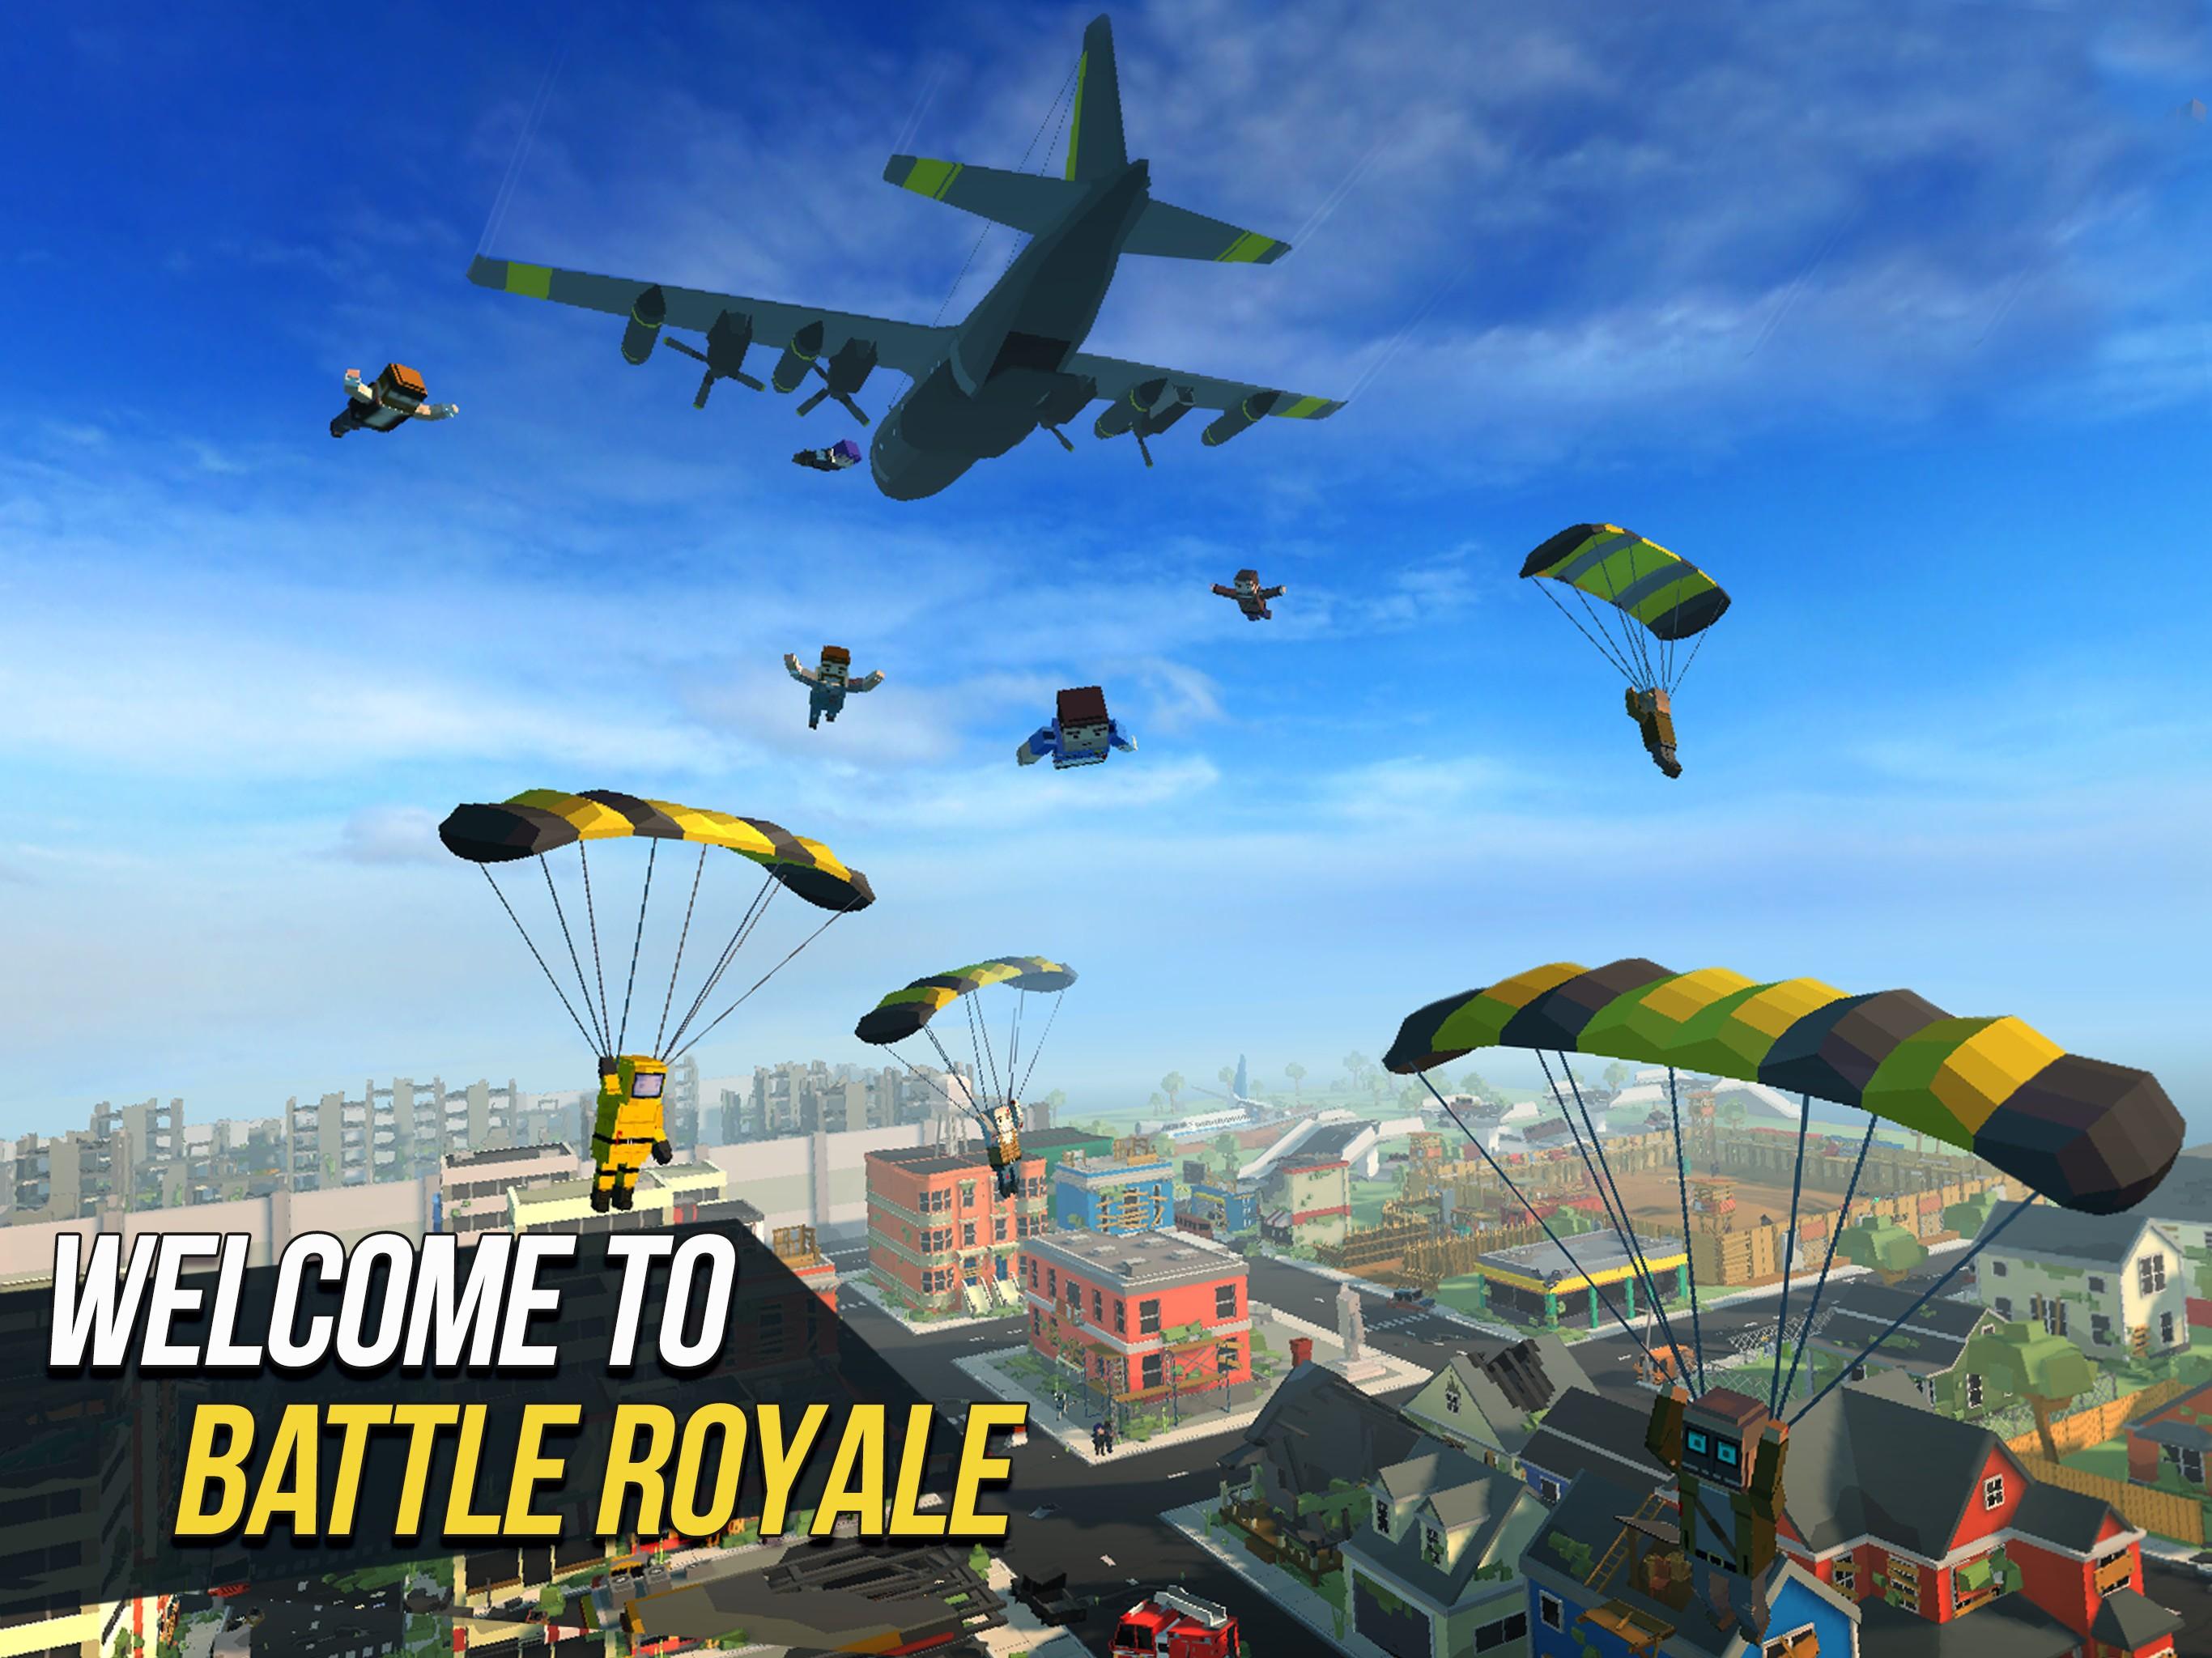 Grand Battle Royale for Android - APK Download - 